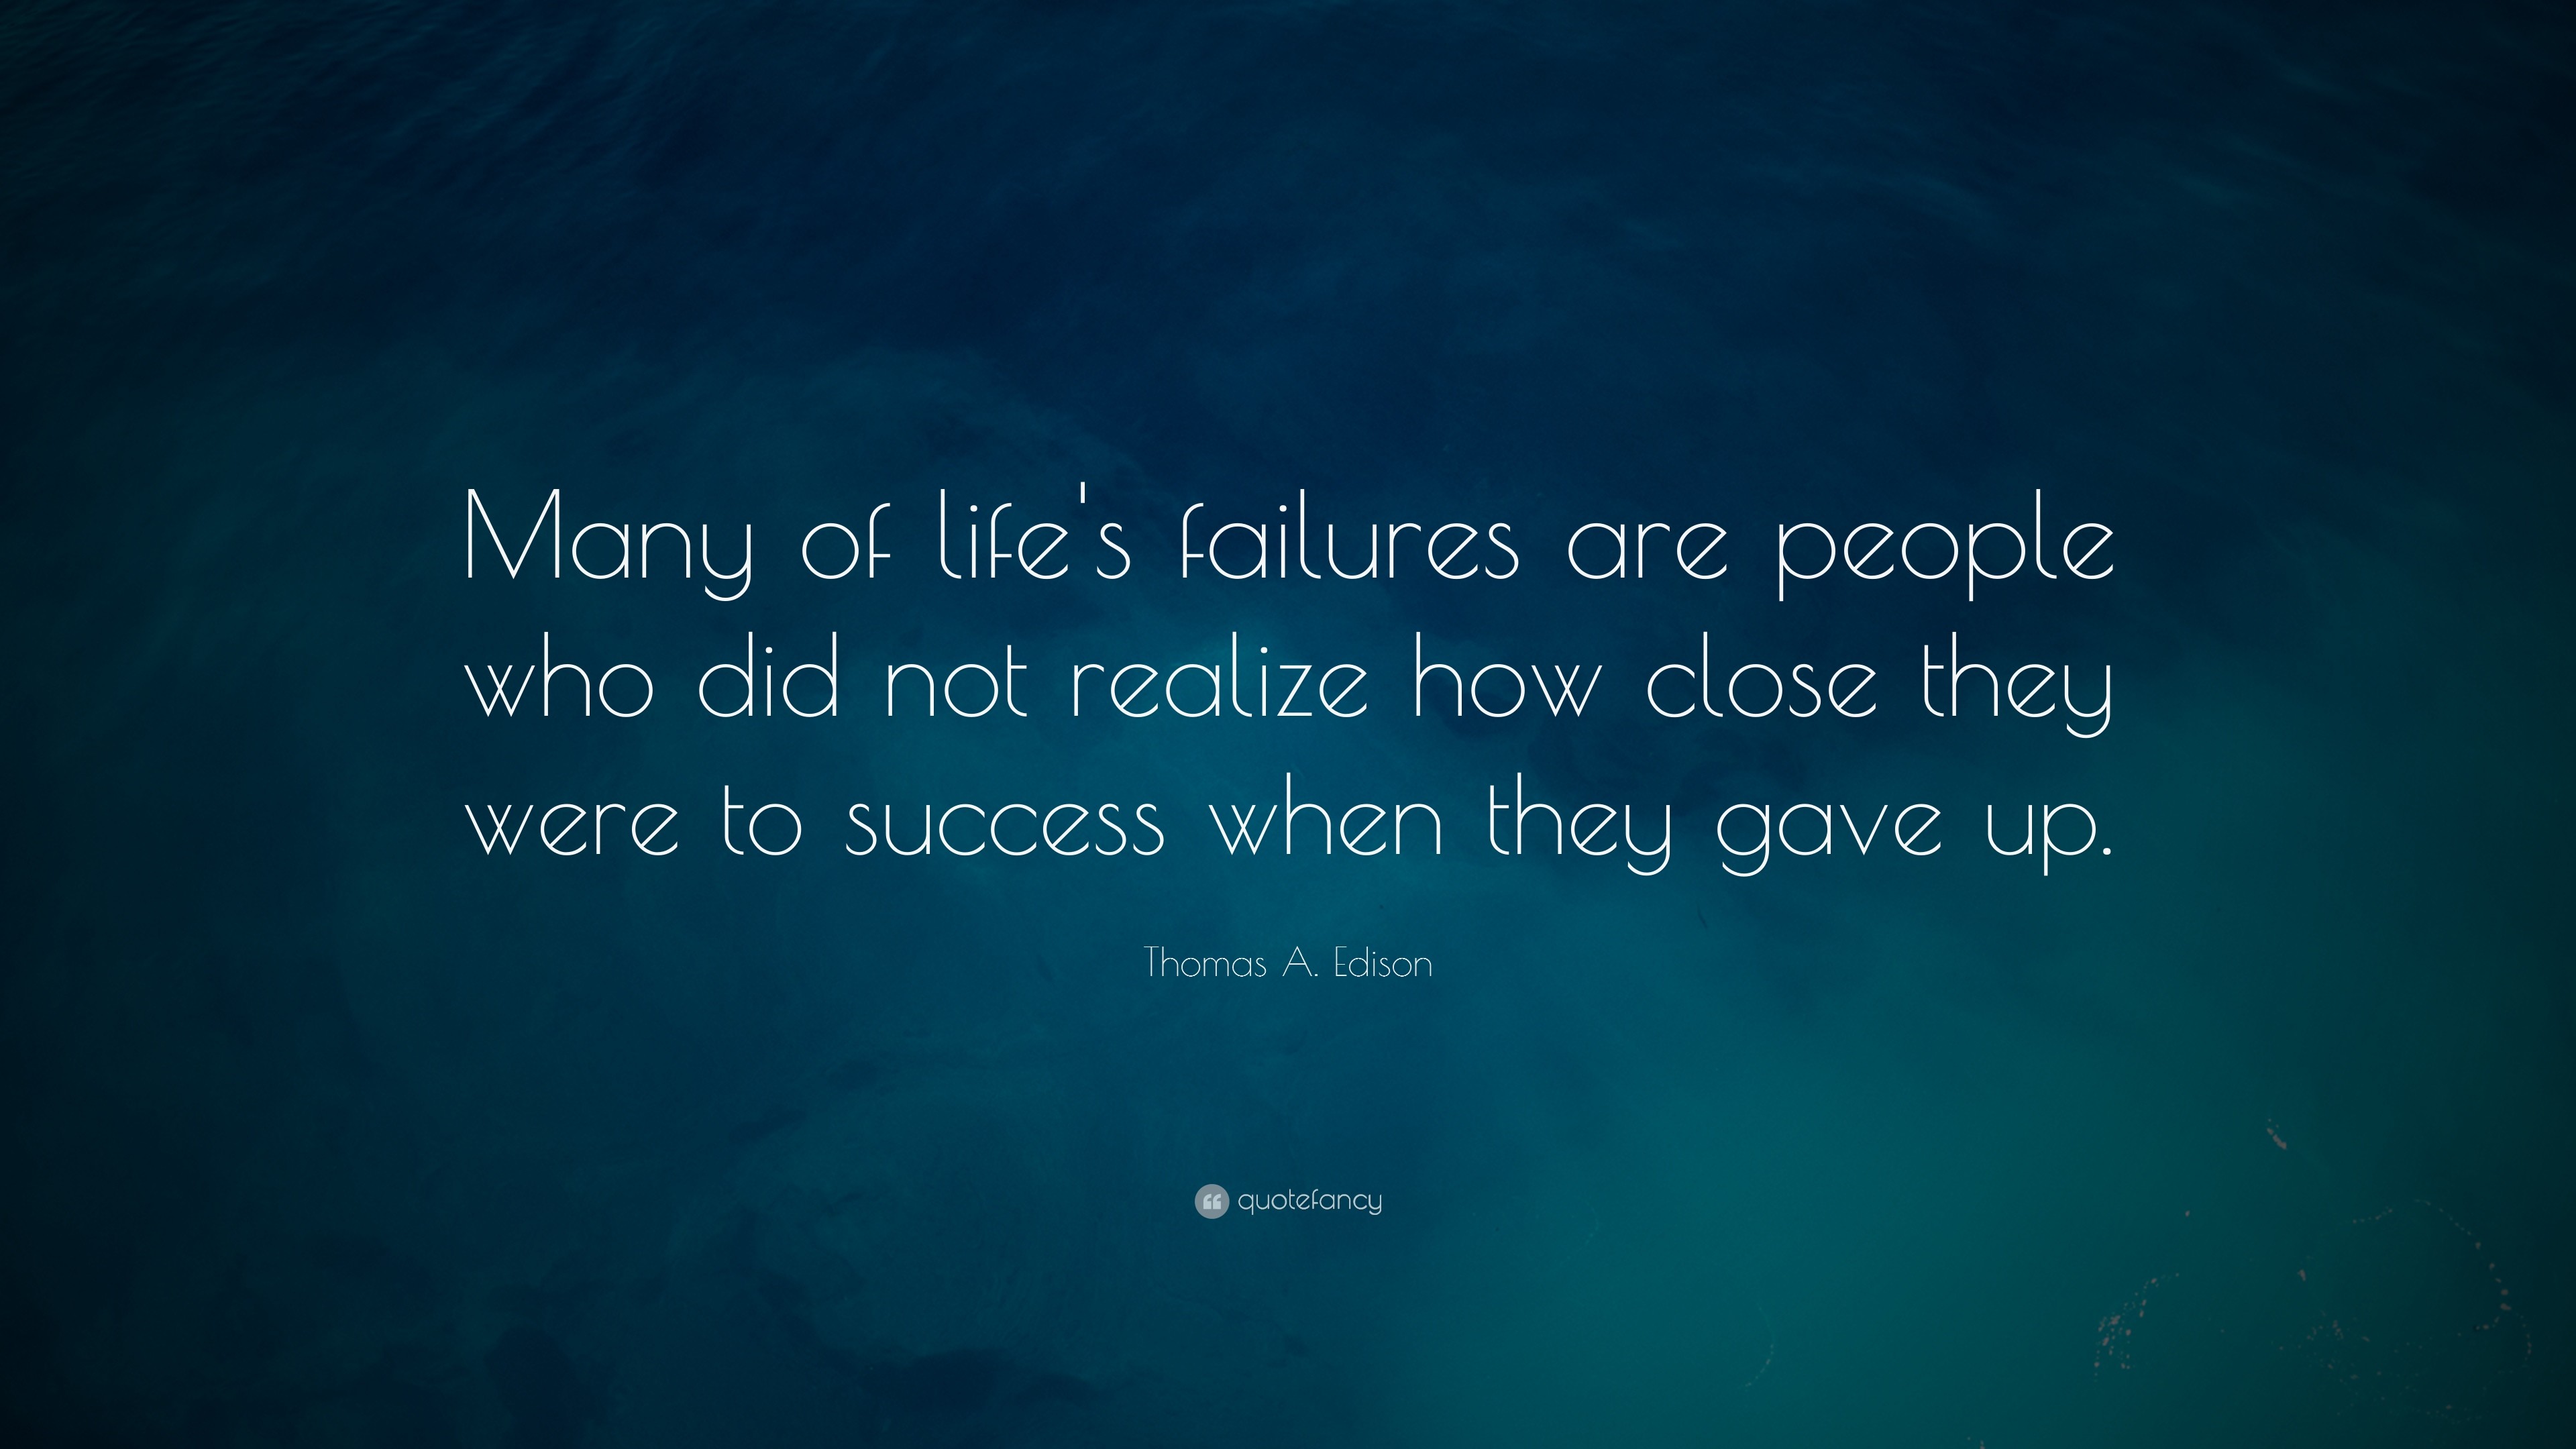 3840x2160 Positive Quotes: “Many of life's failures are people who did not realize  how close